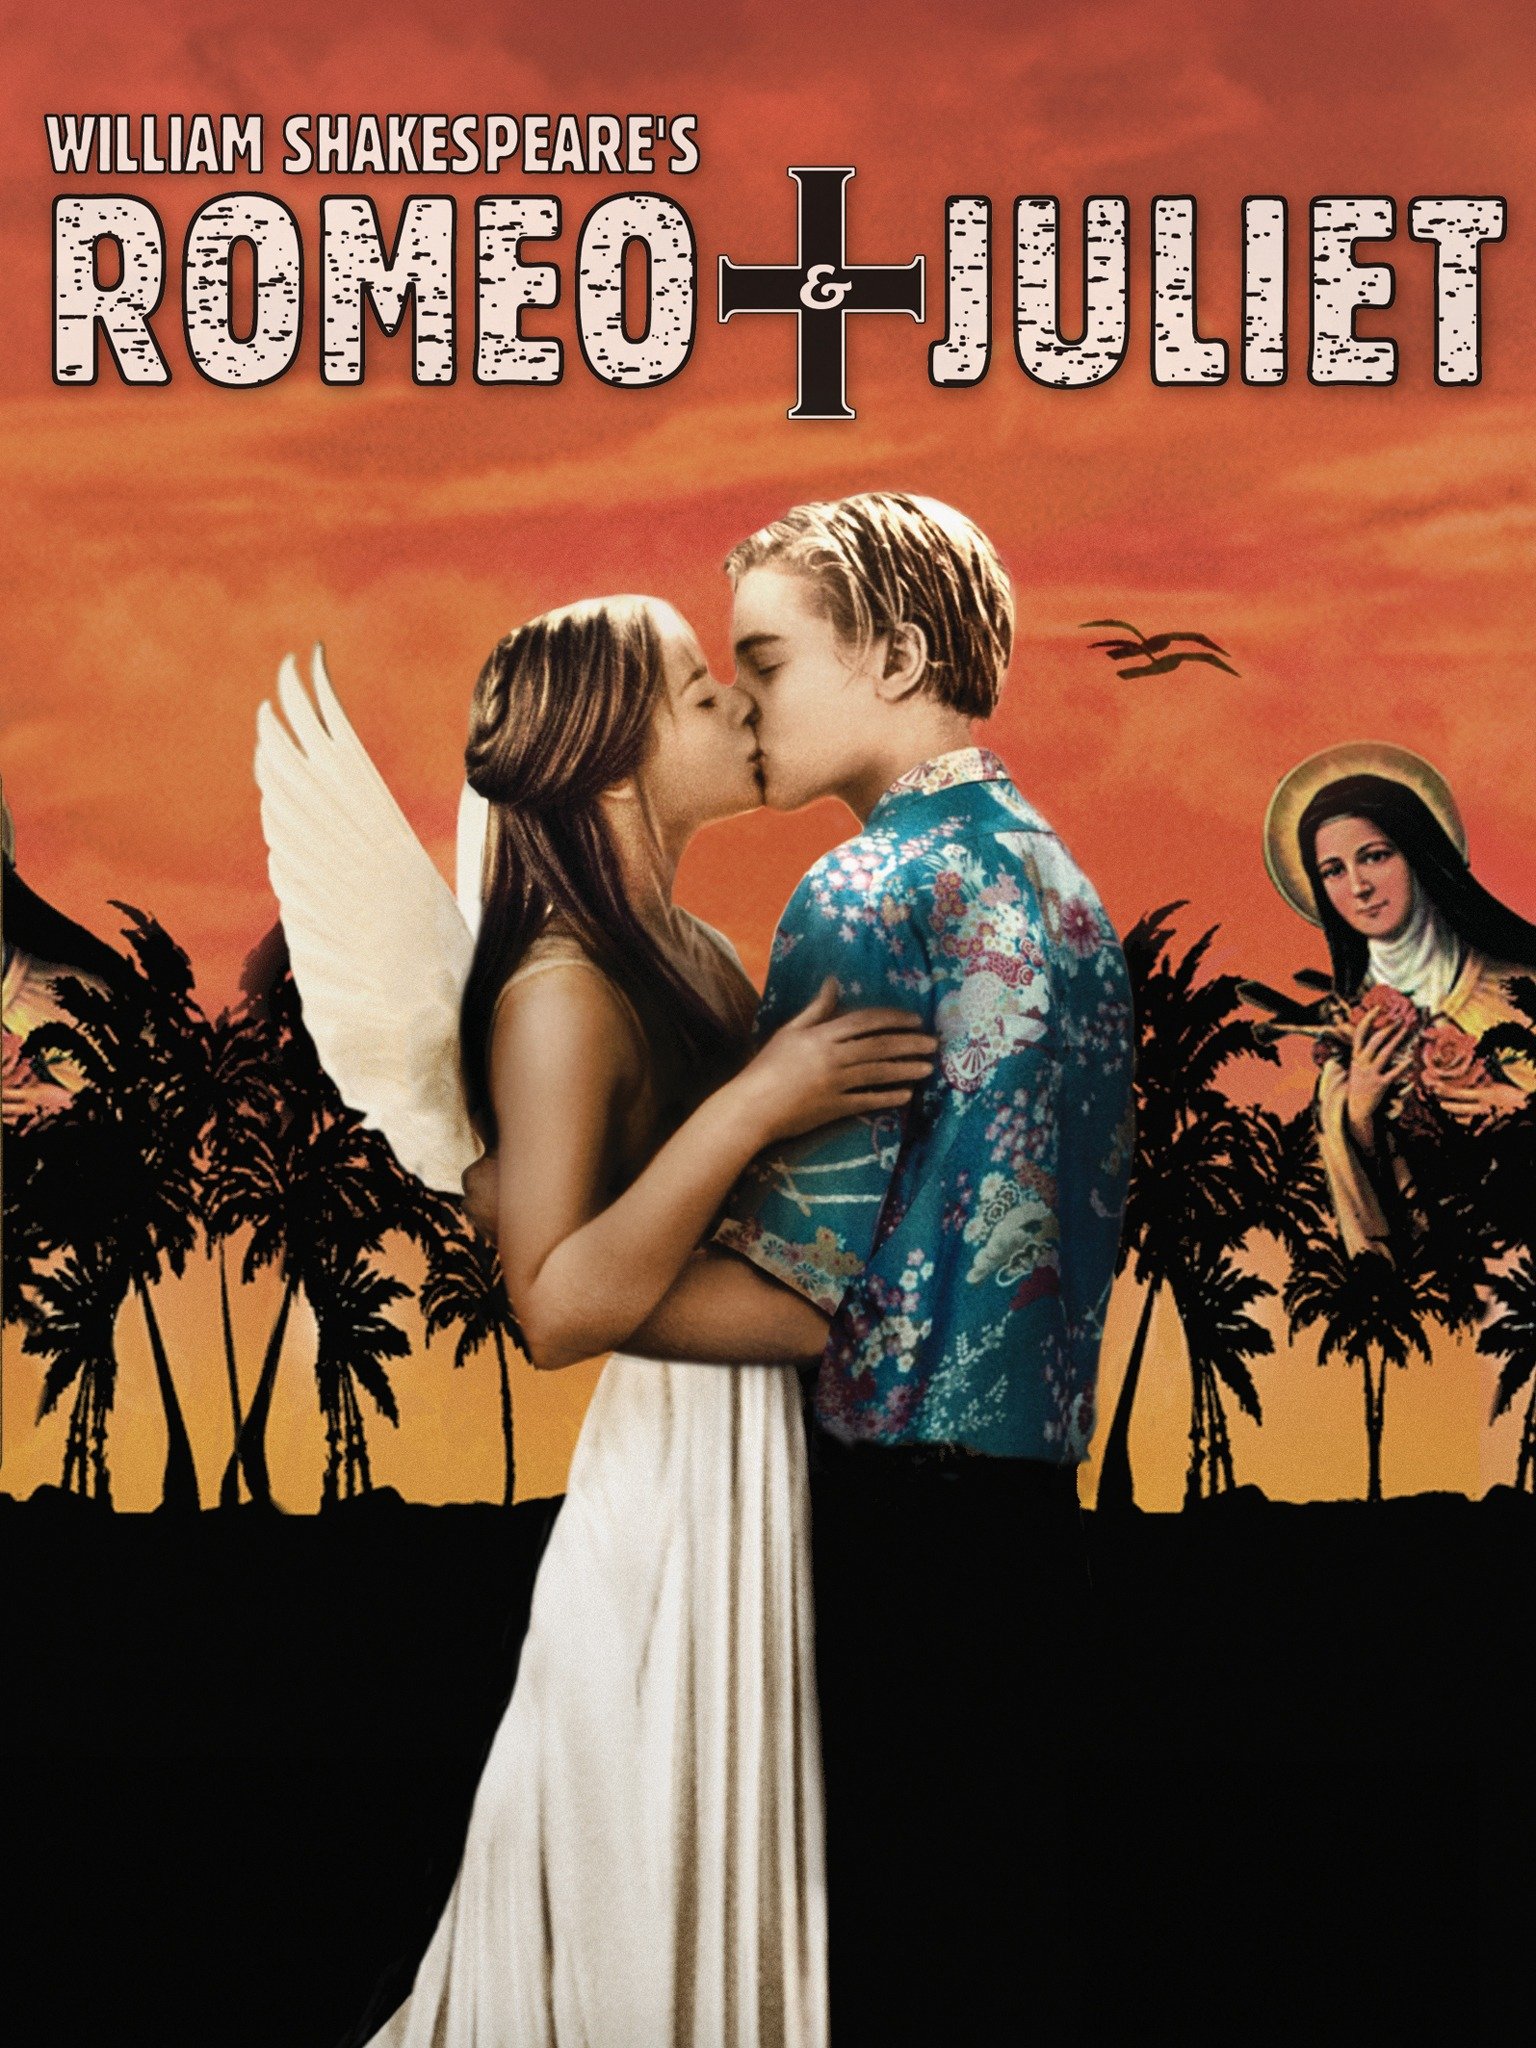 the play romeo and juliet by william shakespeare